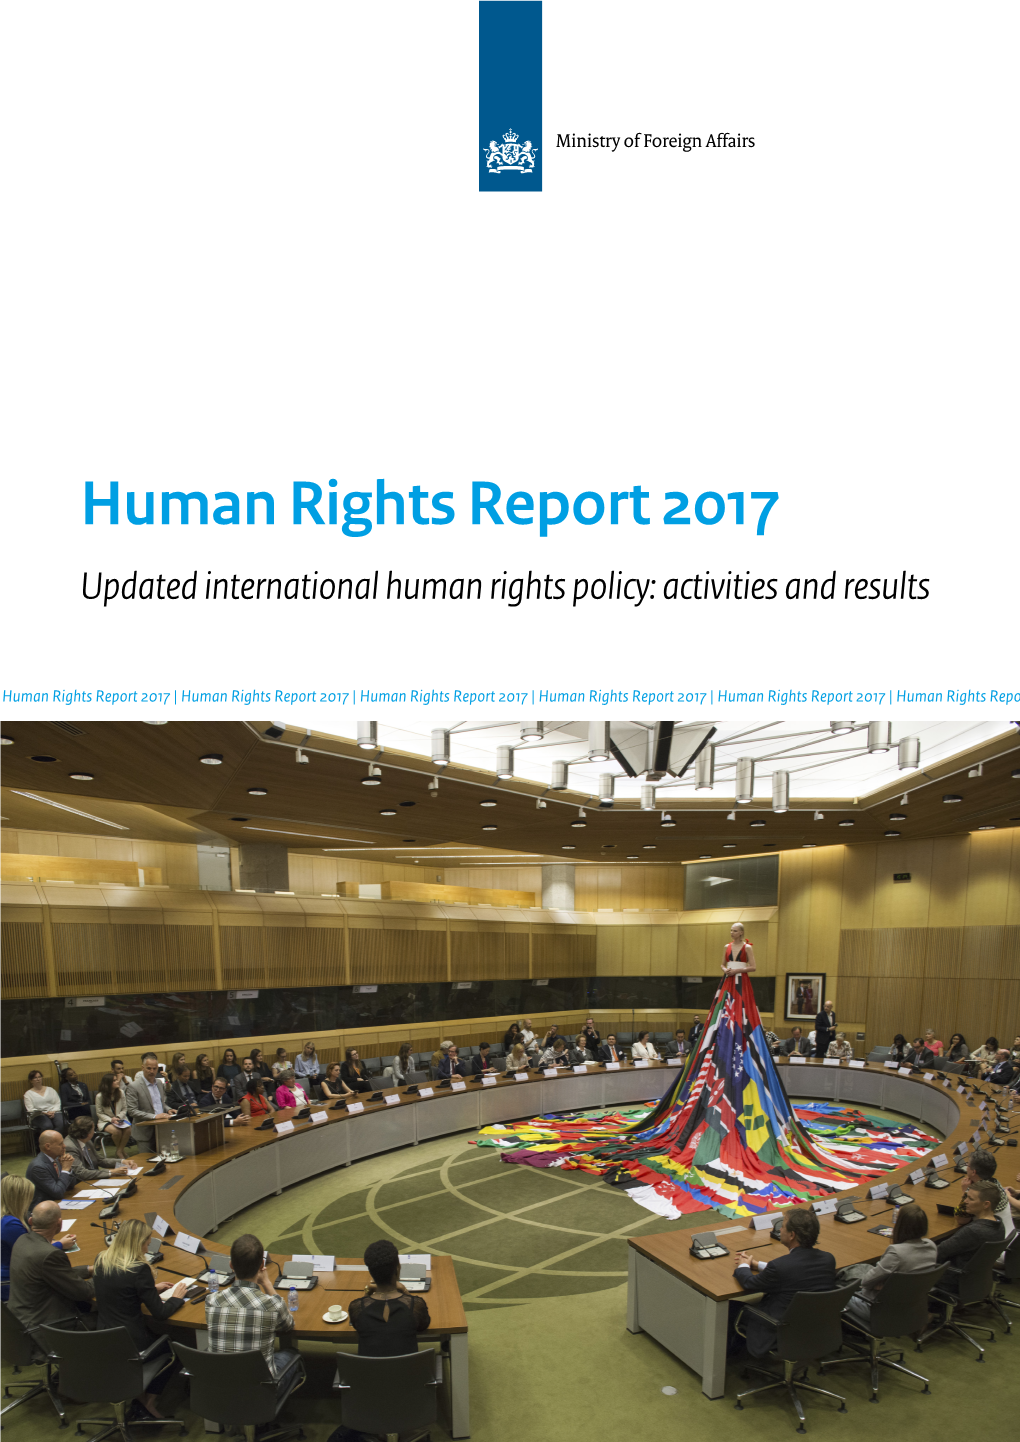 Human Rights Report 2017 Updated International Human Rights Policy: Activities and Results